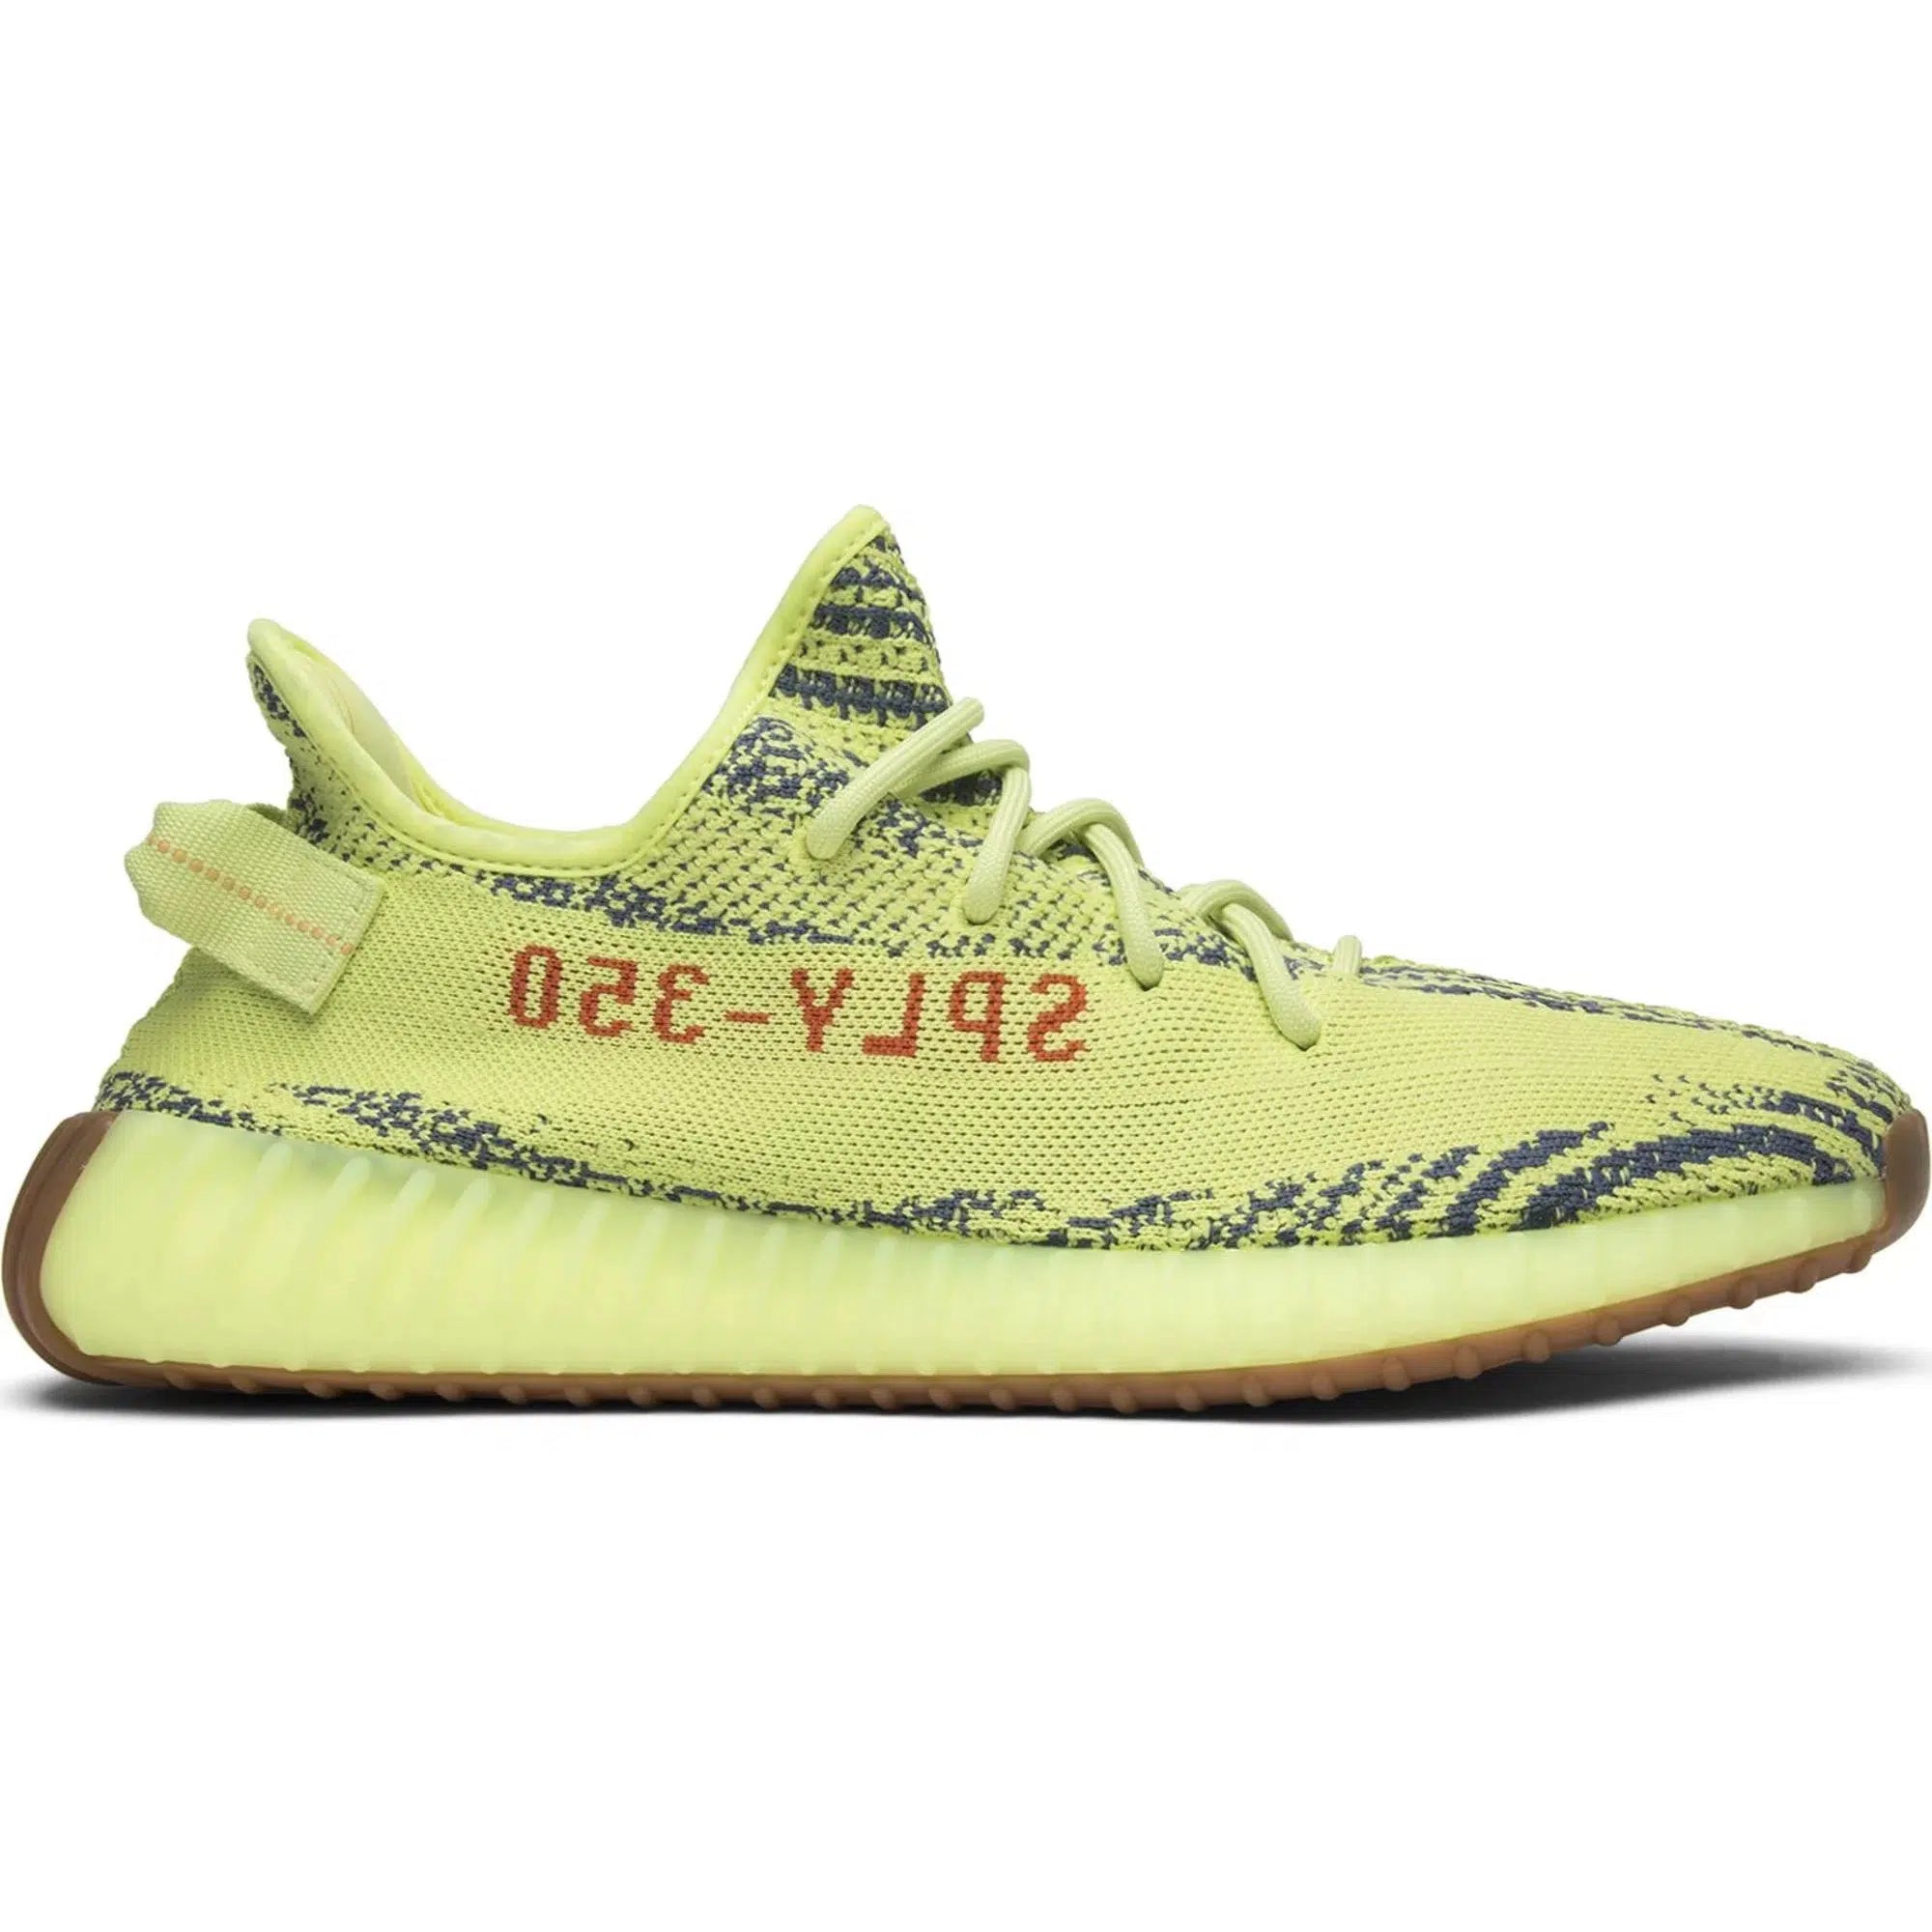 Adidas Yeezy Boost 350 V2 'Semi Frozen Yellow' | Waves Never Die | Adidas | Sneakers